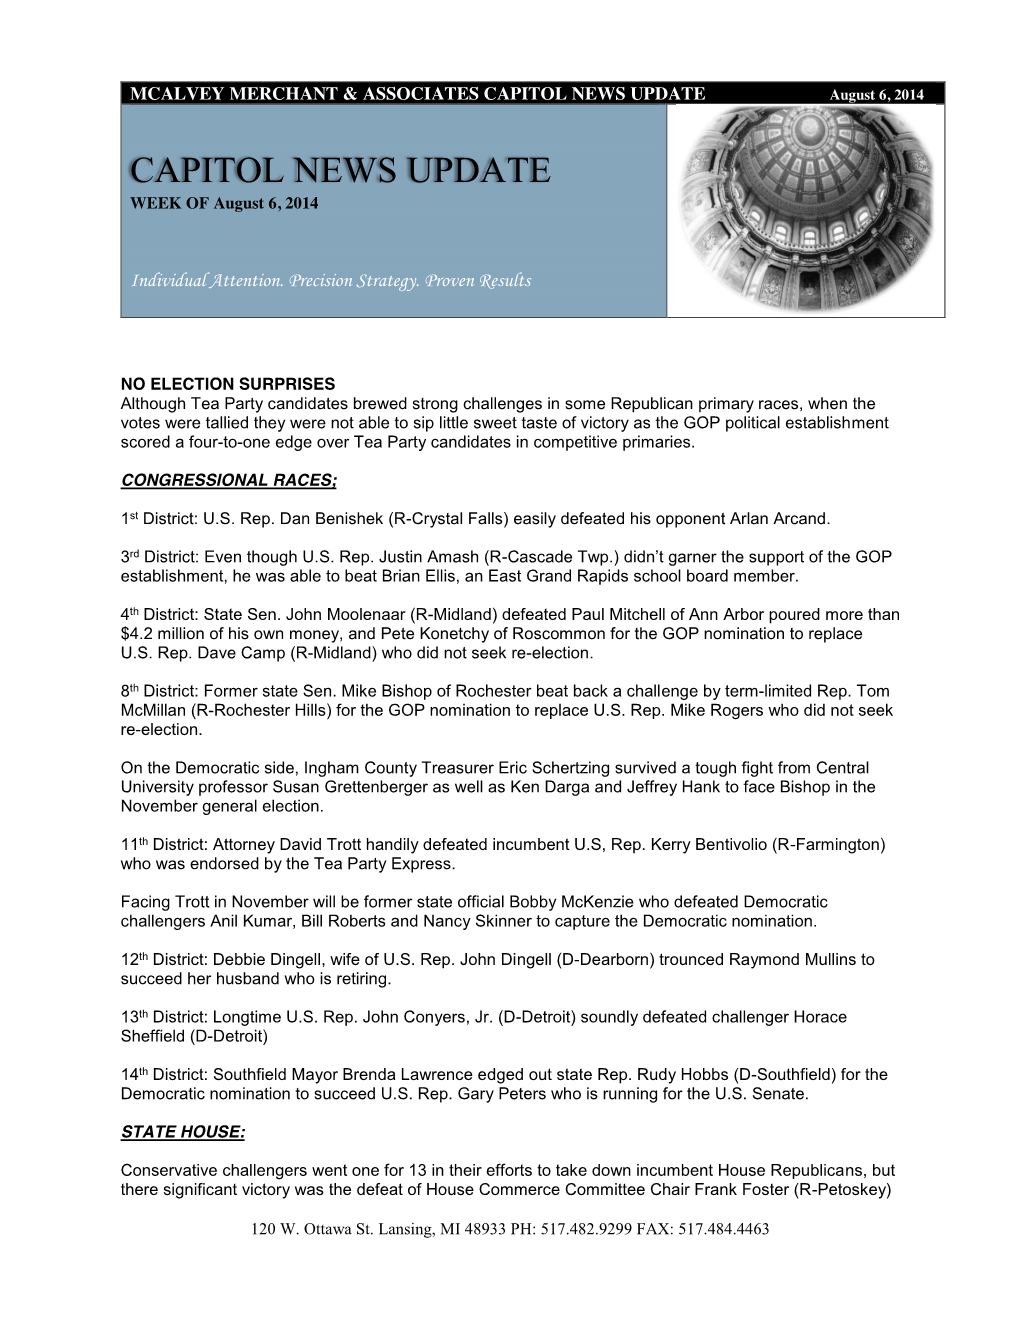 CAPITOL NEWS UPDATE August 6, 2014